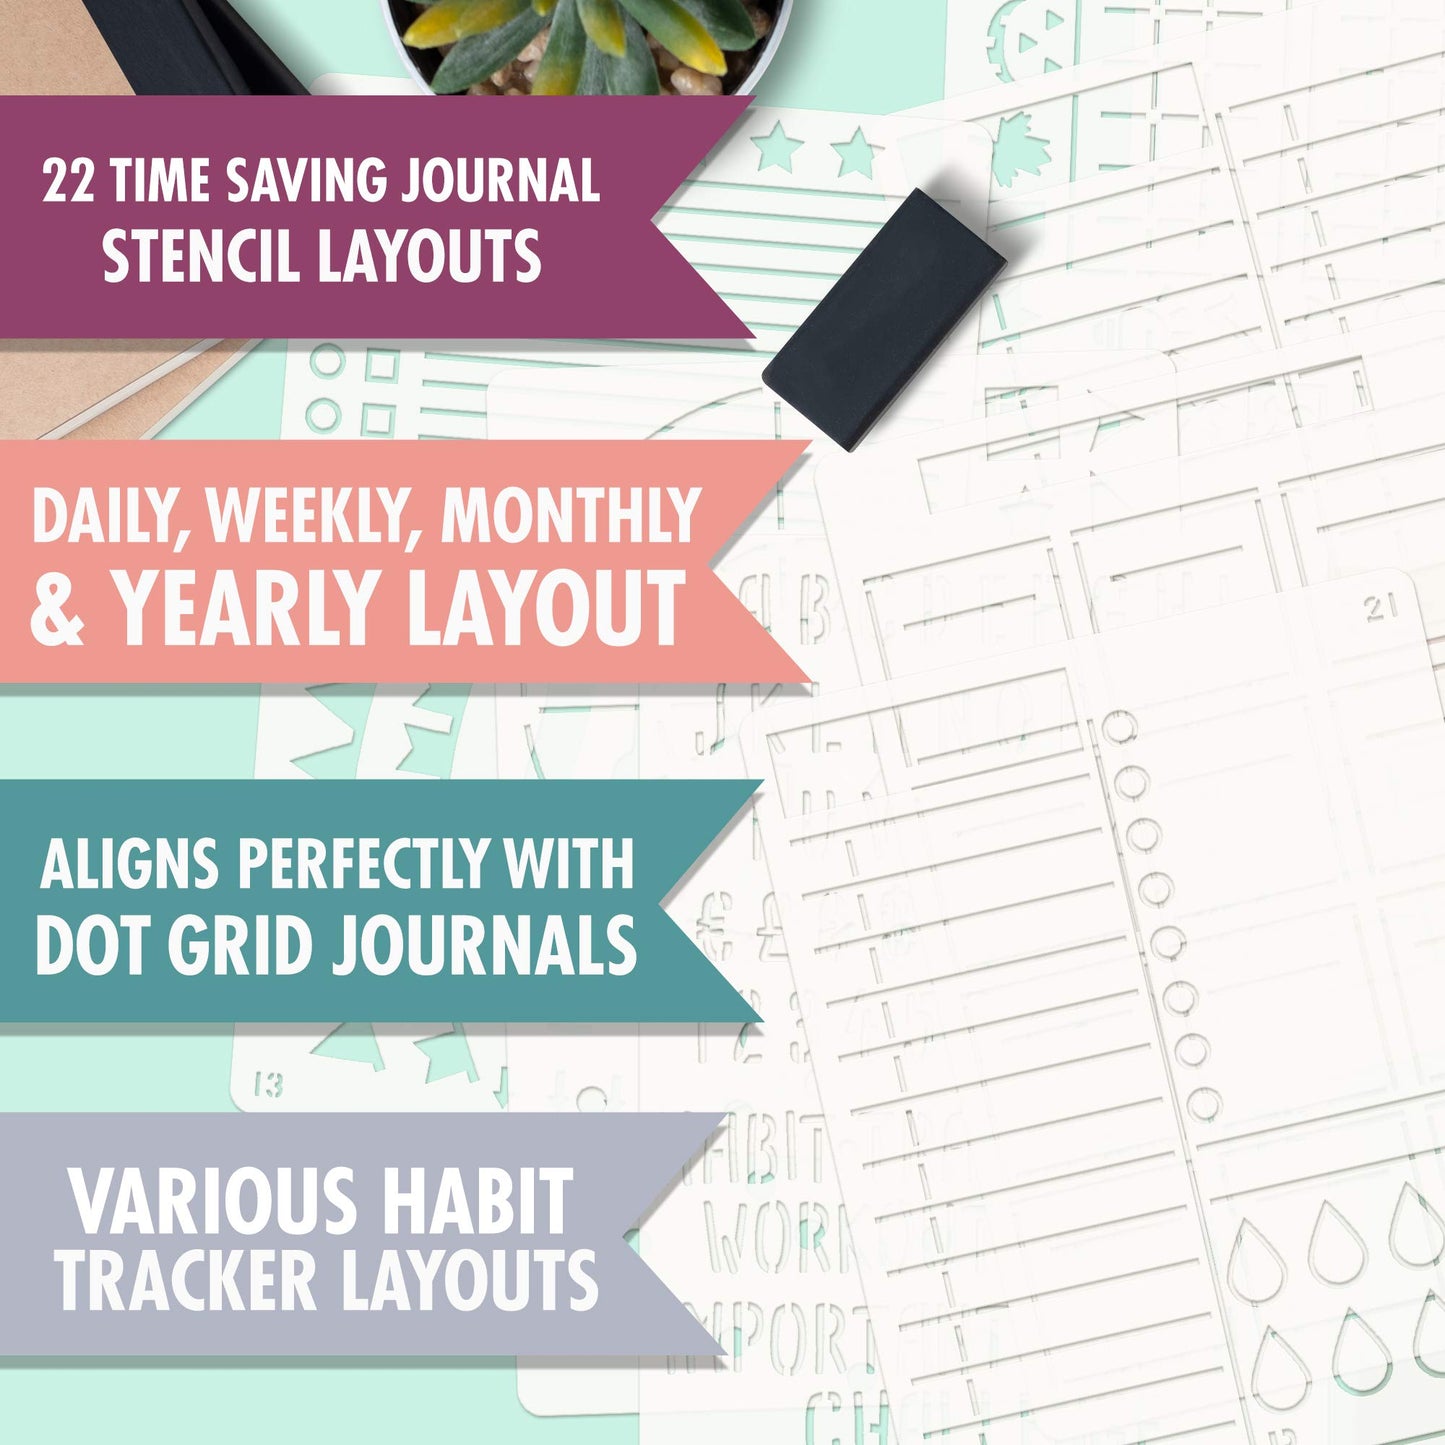 Easy to Use Stencil Set for Dotted Journals - Time Saving Planner Accessories/Supplies Kit Makes Creating Layouts Easy - Incl. Bullet Point Checklists, Daily/Weekly/Monthly Calendars